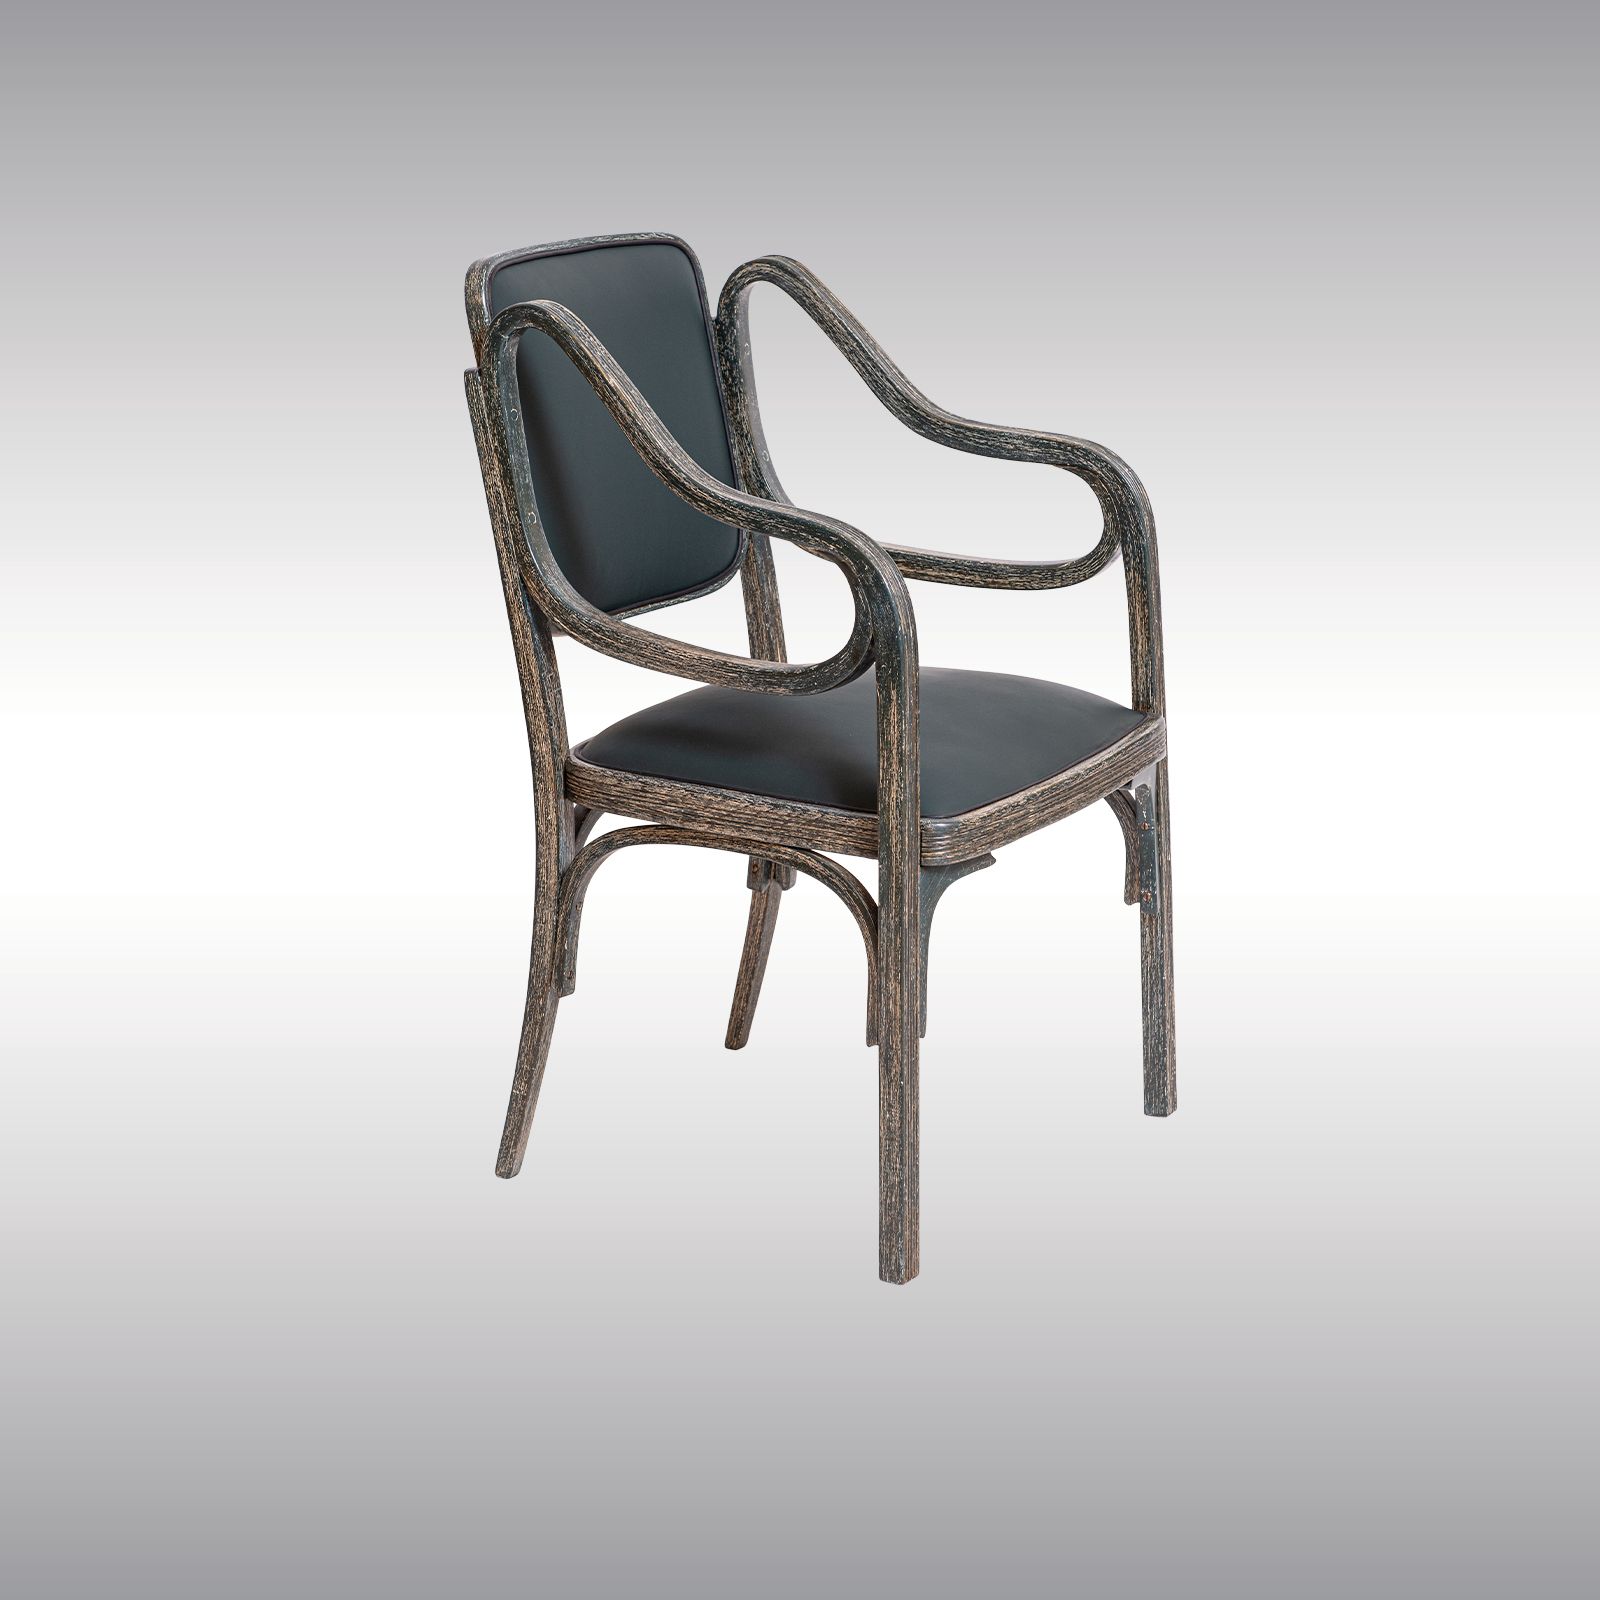 WOKA LAMPS VIENNA - OrderNr.: 50100|Otto Wagner Armchair 1901 - Design: Otto Wagner